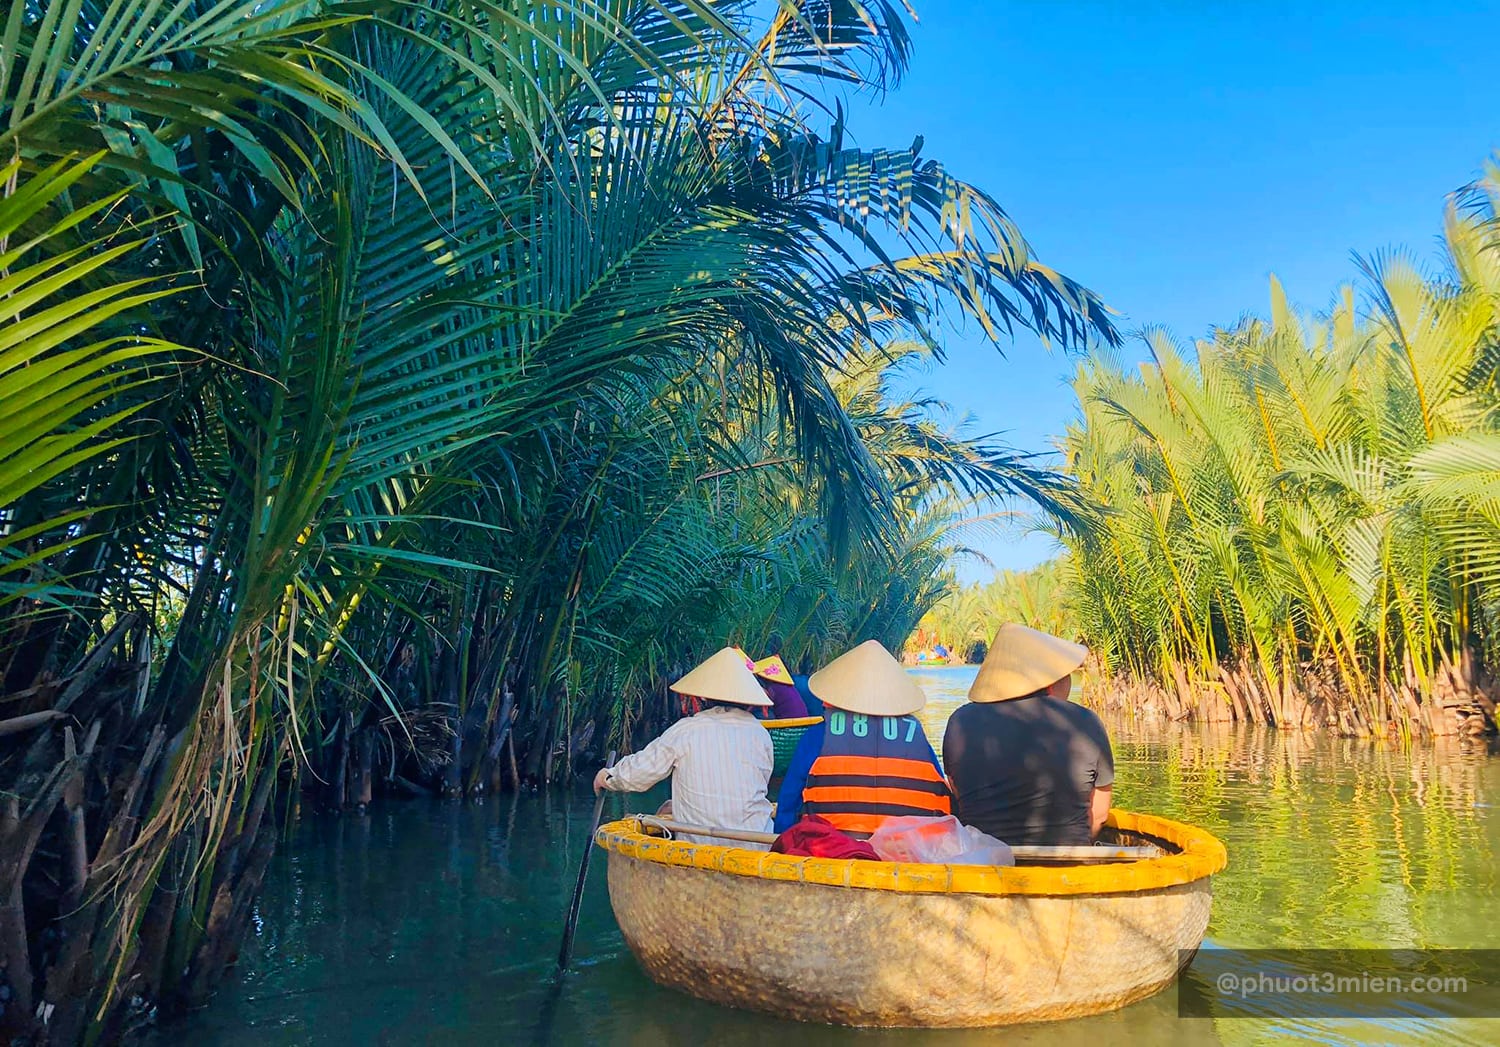 Check in SEVEN ACRES COCONUT FOREST in Hoi An - Basket Bao Thich Boat Ride